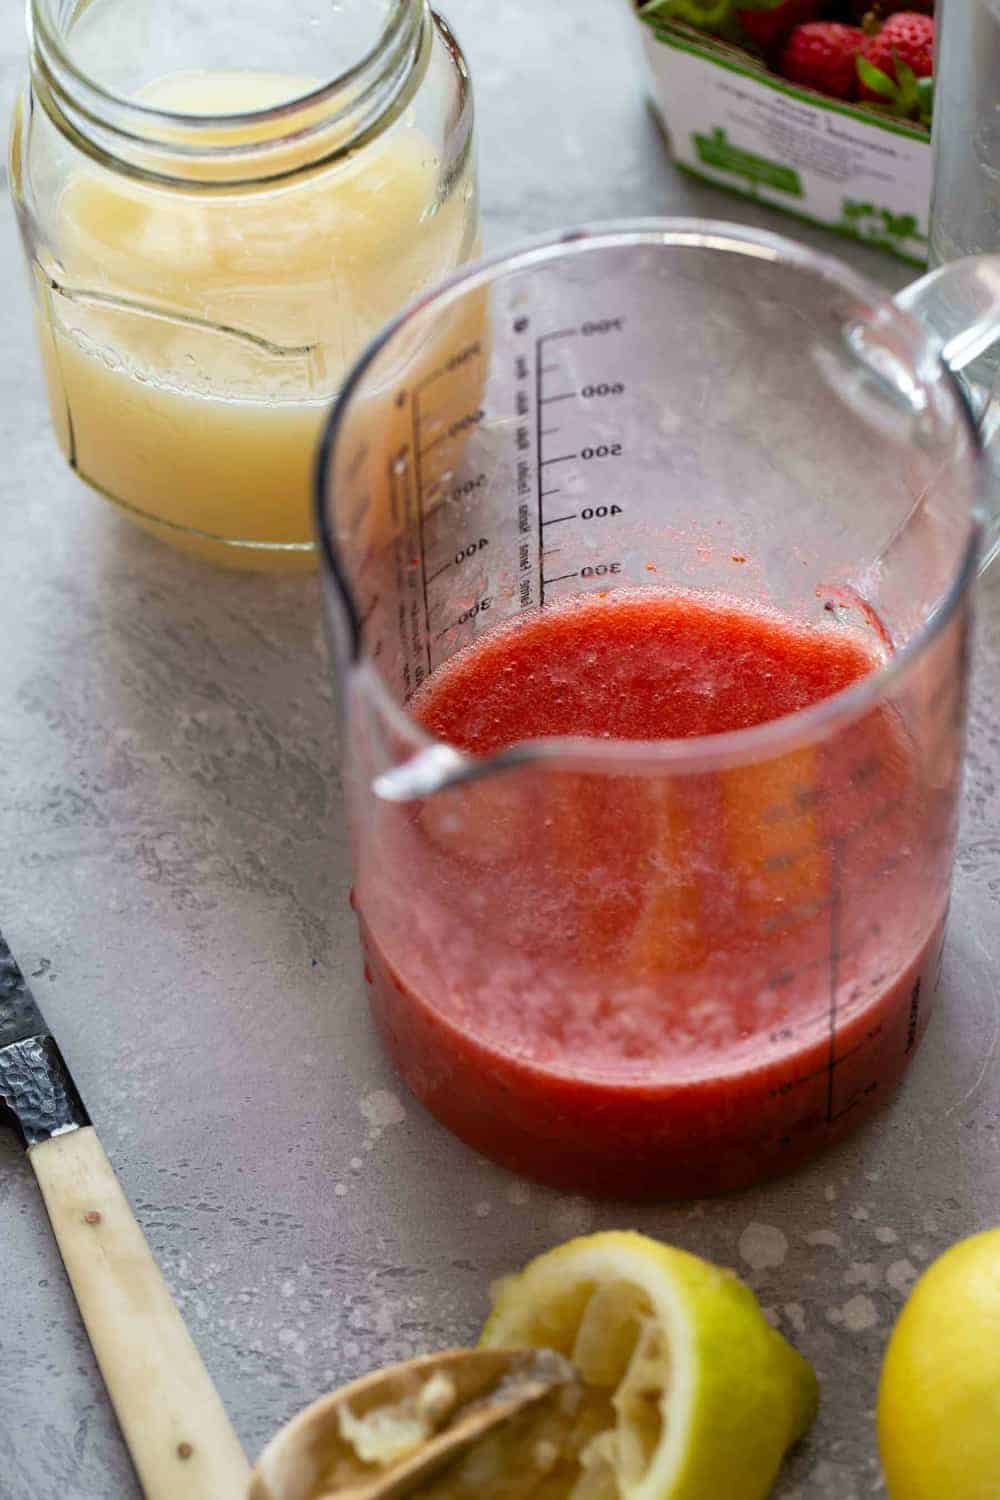 Strawberry puree and lemon juice in measuring cups